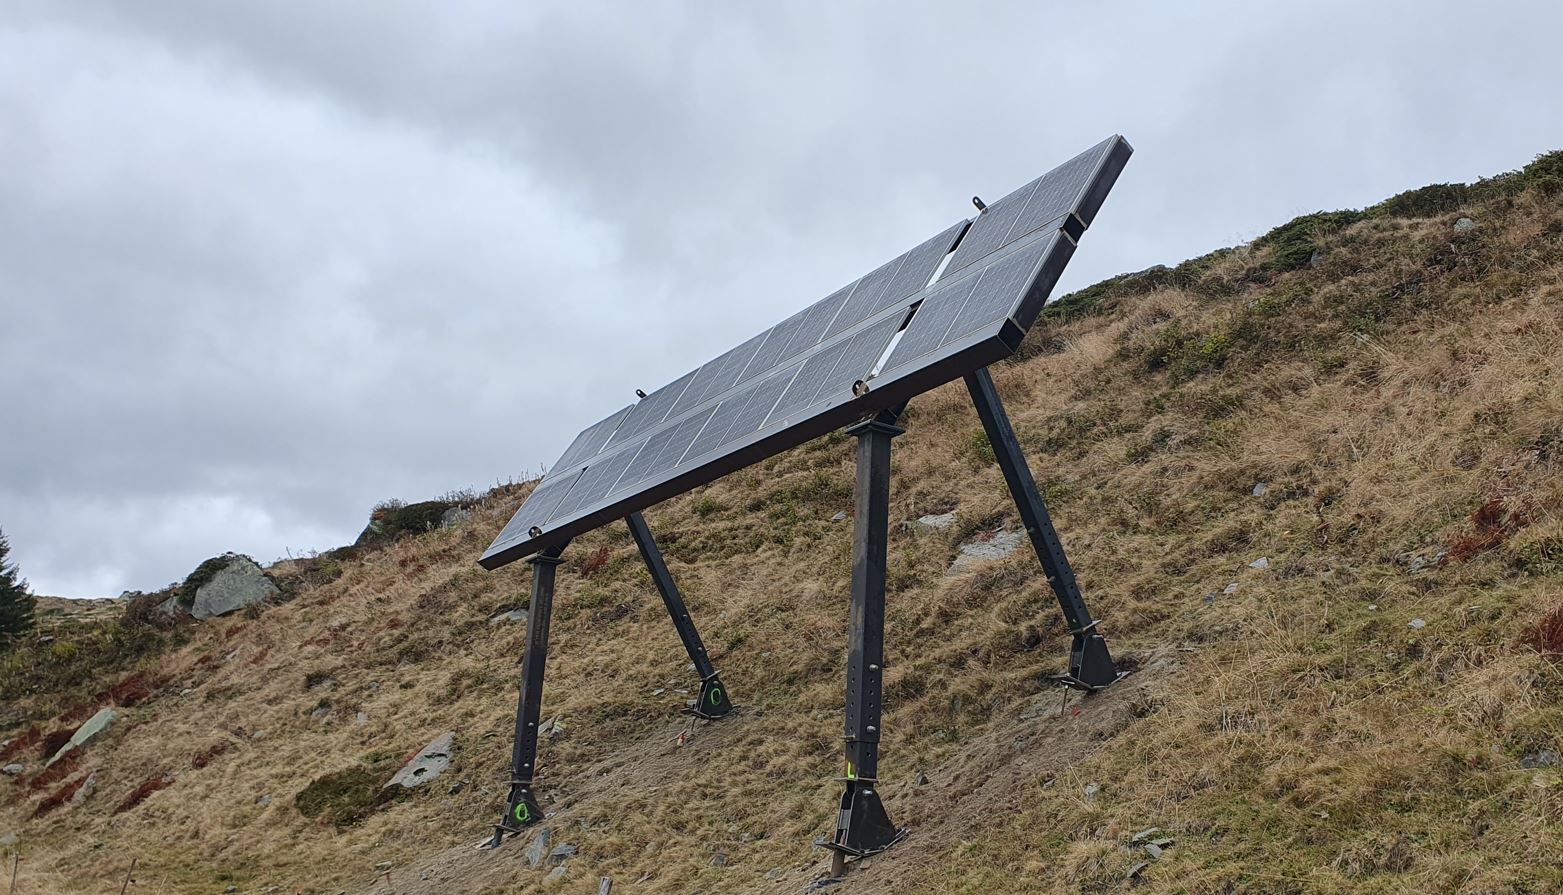 Test installation in Tujetsch at the NalpSolar solar project - Such installations are also to be used in the Glarus Süd Solar project